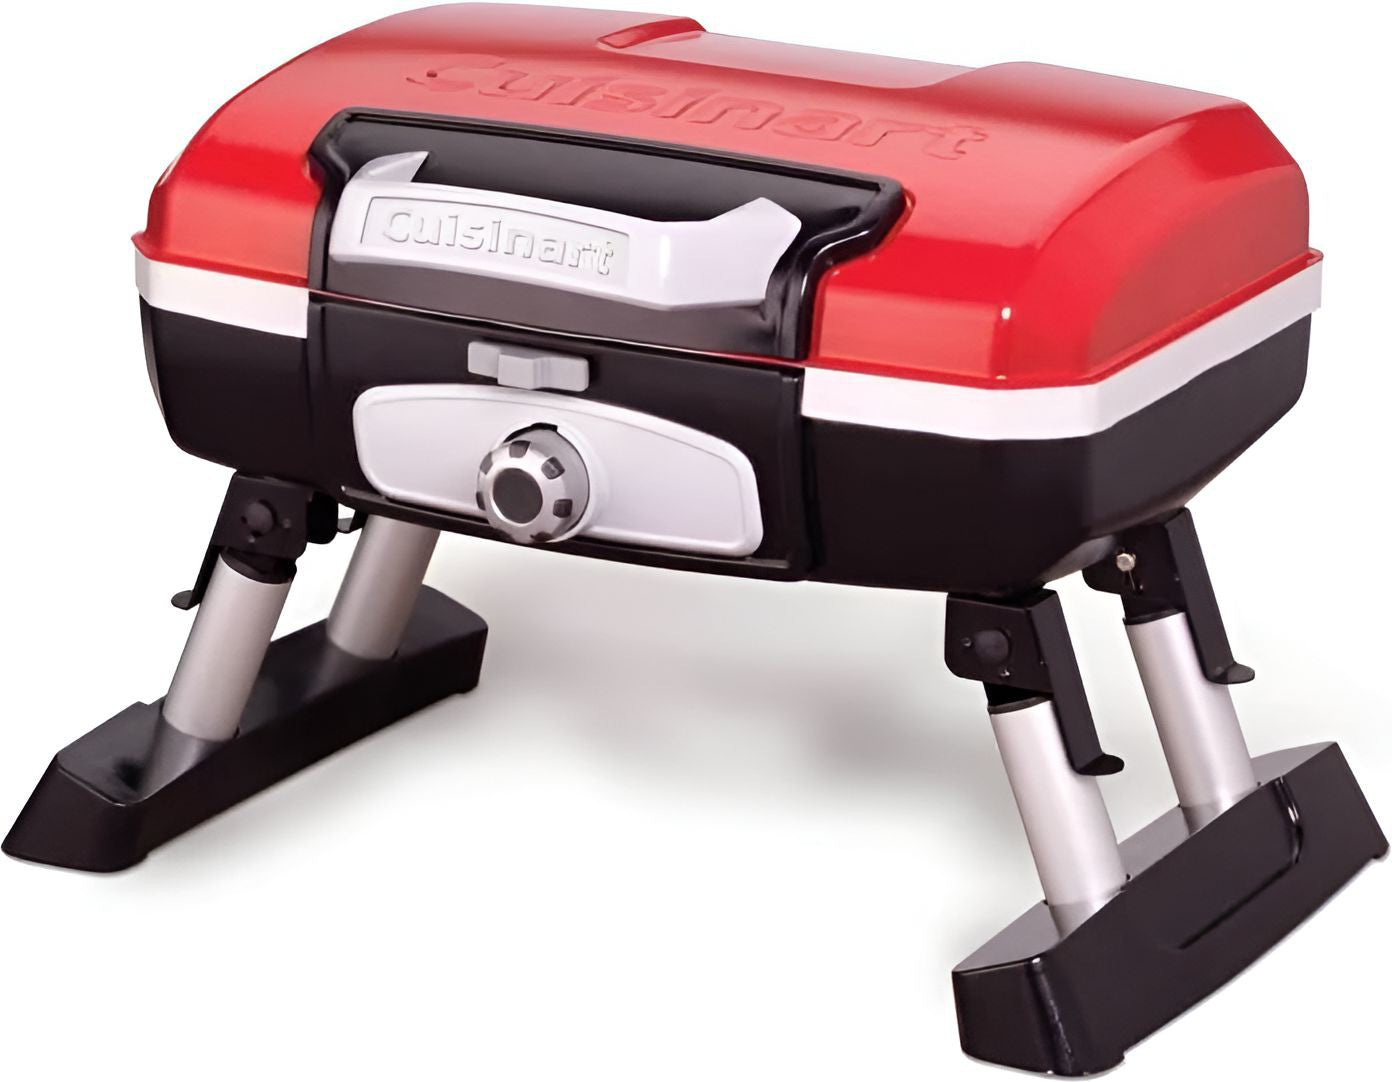 Cuisinart - Red Petite Gourmet Portable Tabletop Gas Grill - CCG-180T-C